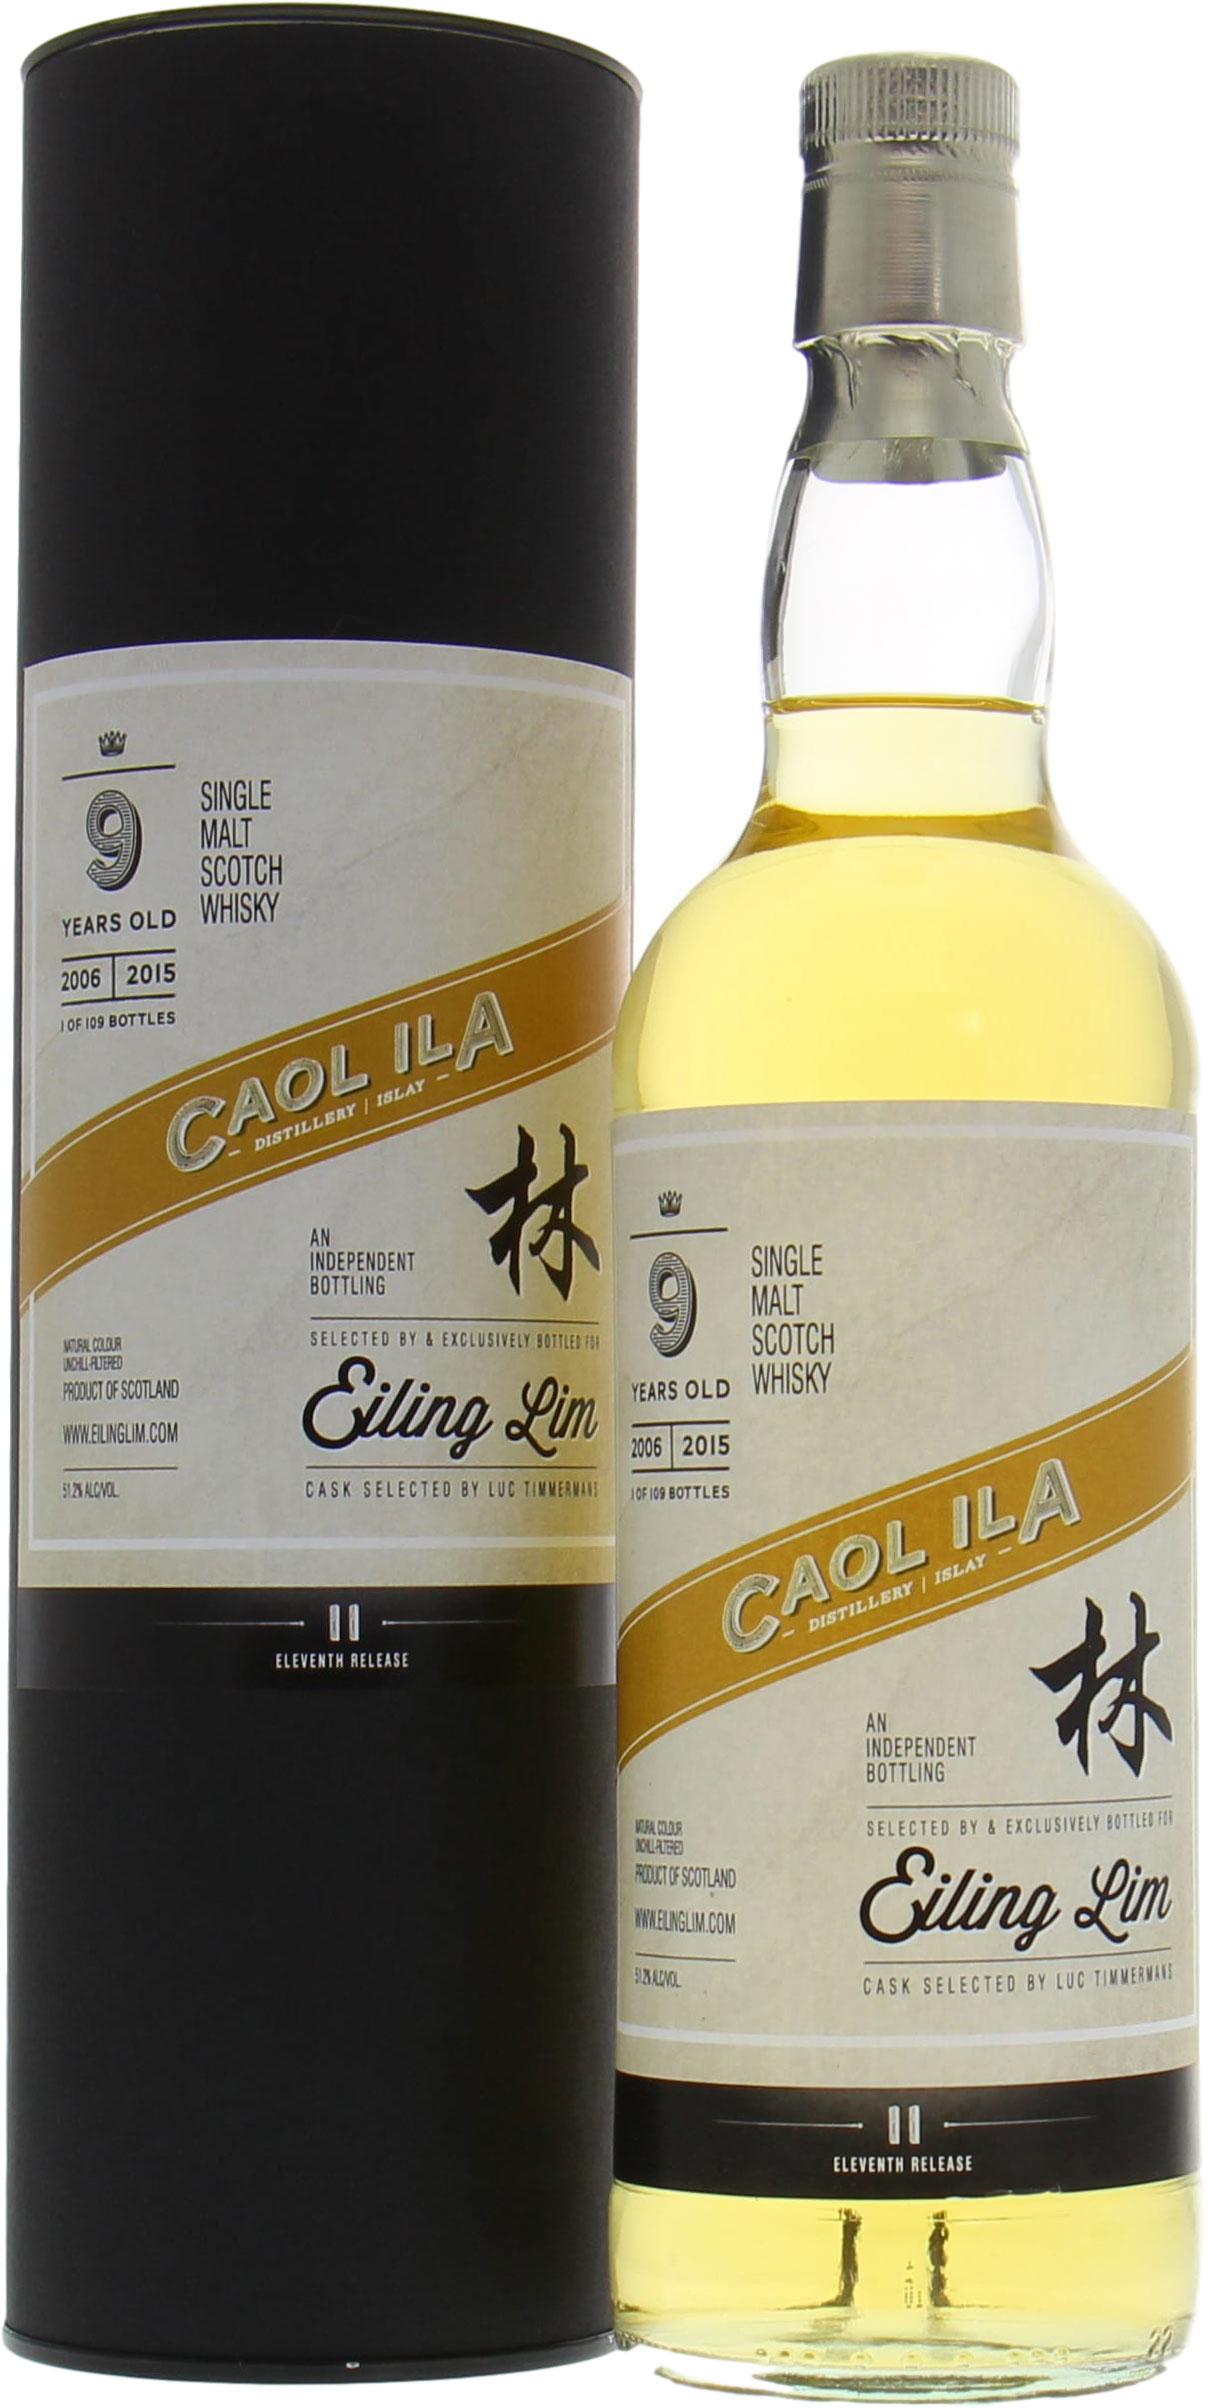 Caol Ila - 9 Years Old Eiling Lim 11th Release 51.2% 2006 In Original Container